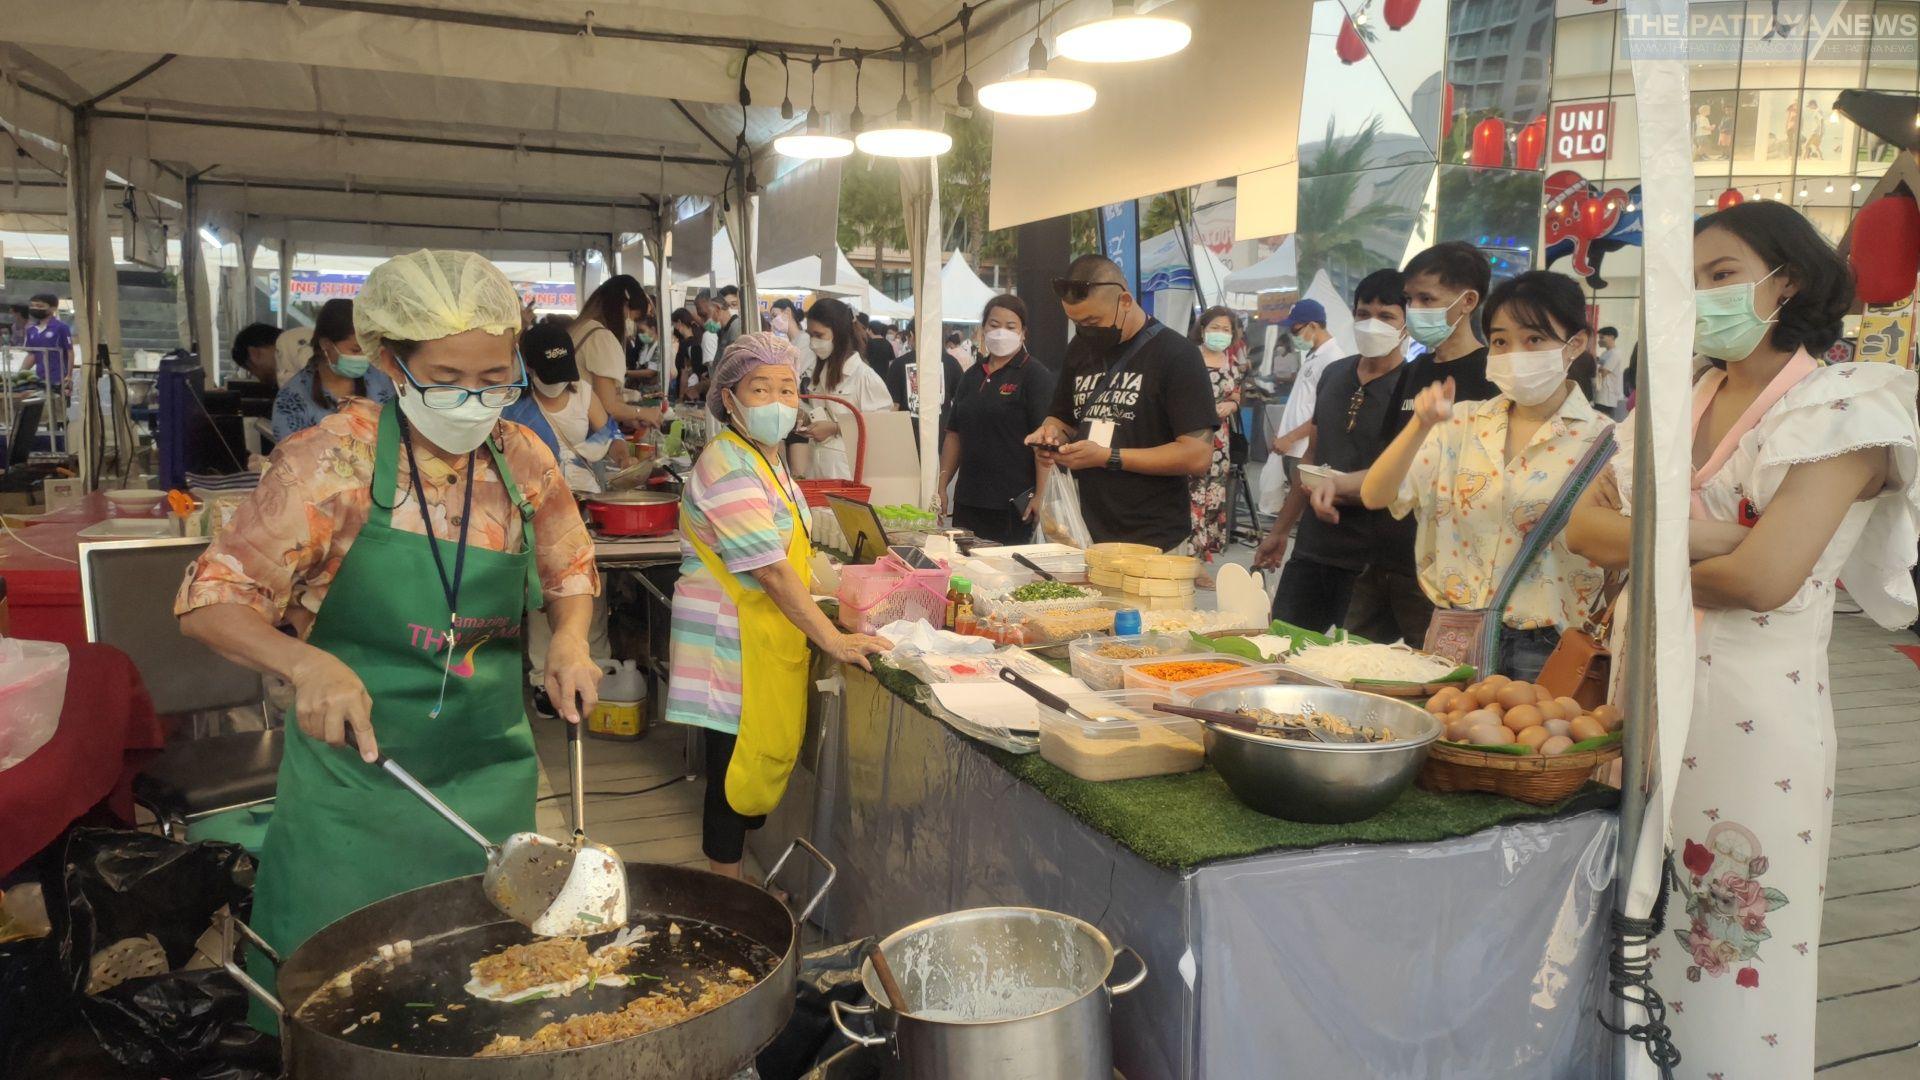 Pattaya Squid Fair generated over one million in revenue, Pattaya Business and Tourism Association says